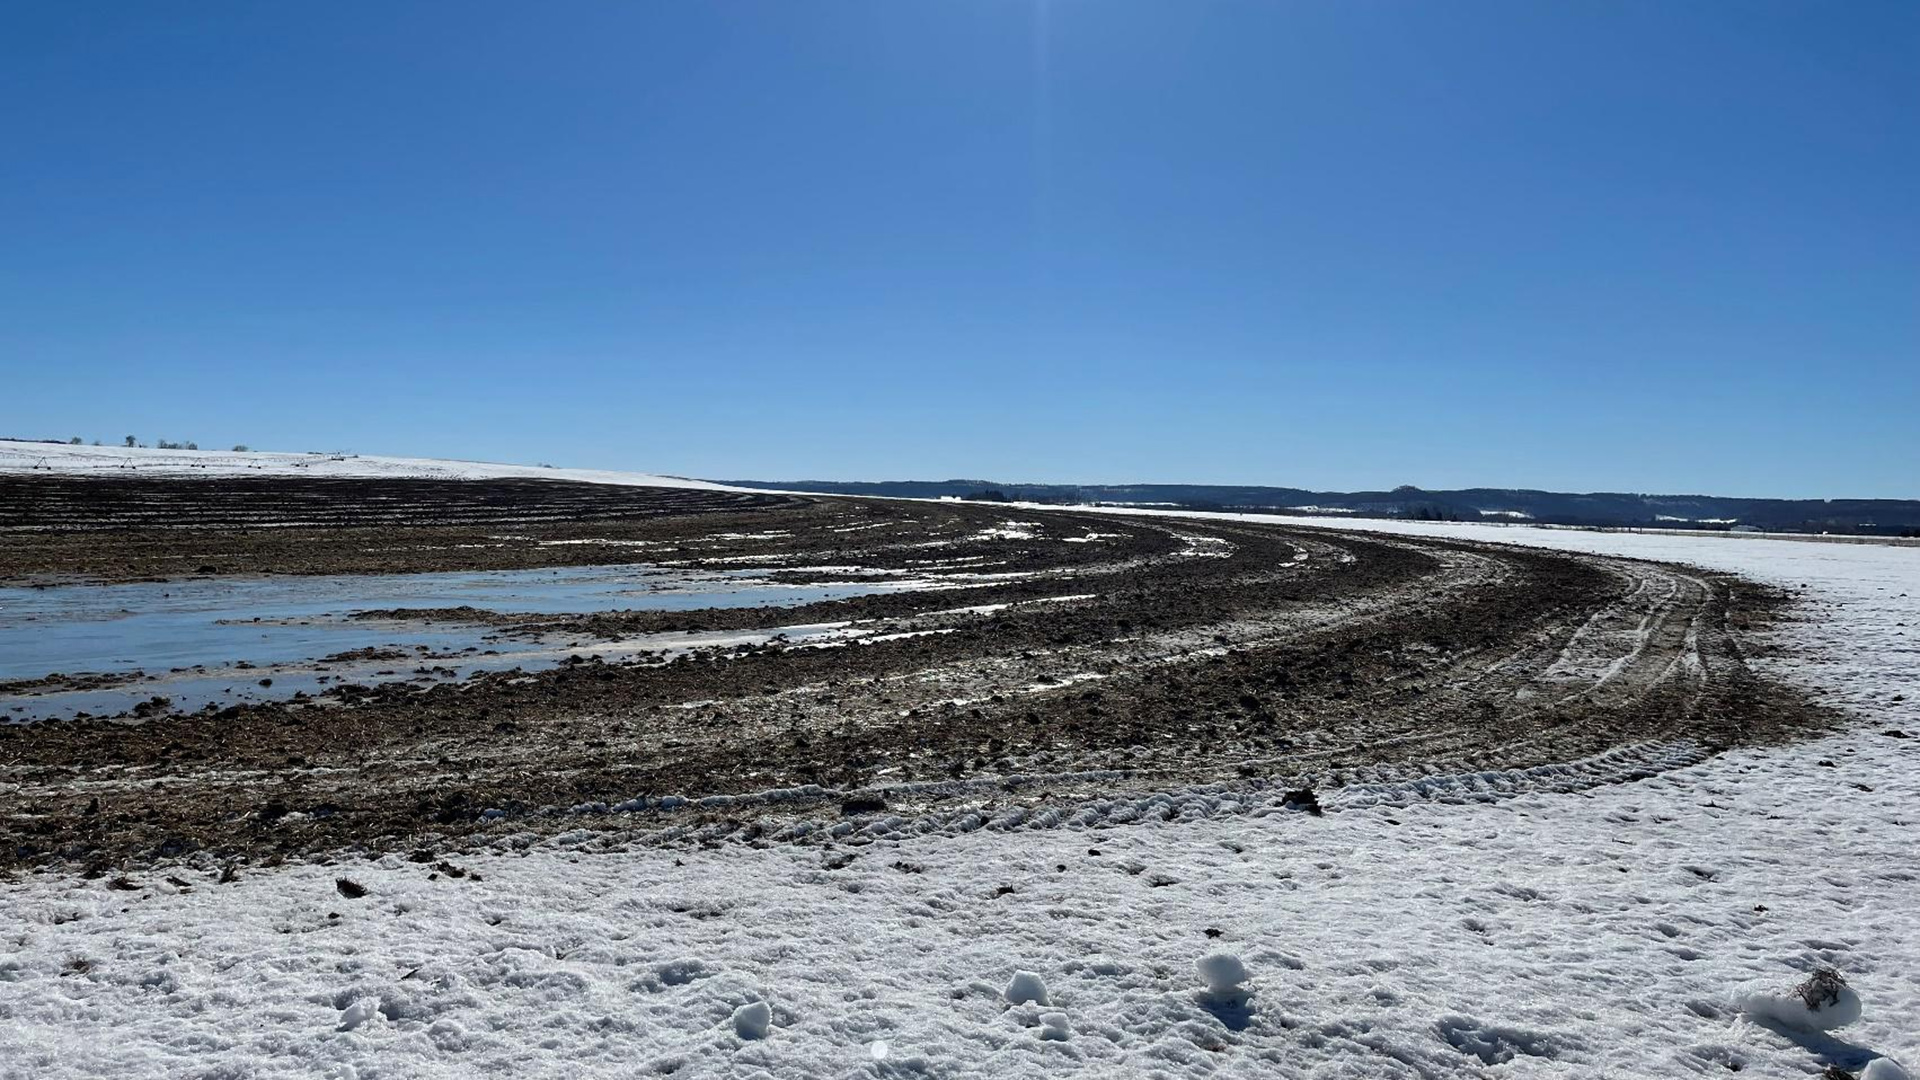 Curved alternating bands of soil and snow showing the outlines of treads from a tracked vehicle are visible in a field covered with snow and areas of ice and open water, with a bluff visible on the horizon.